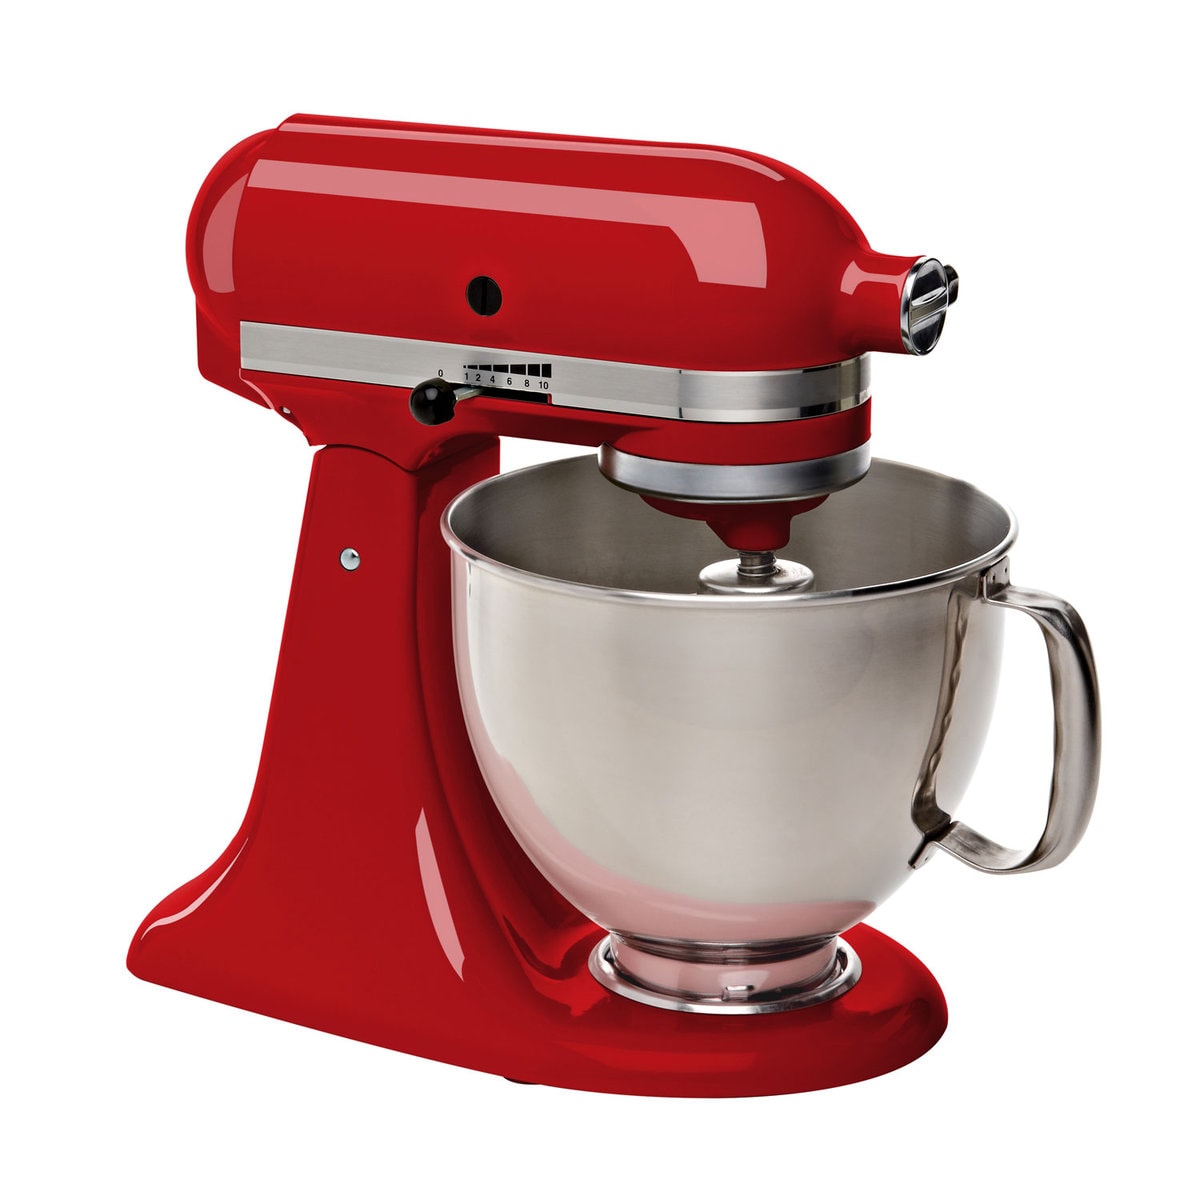 A red colored KitchenAid mixer